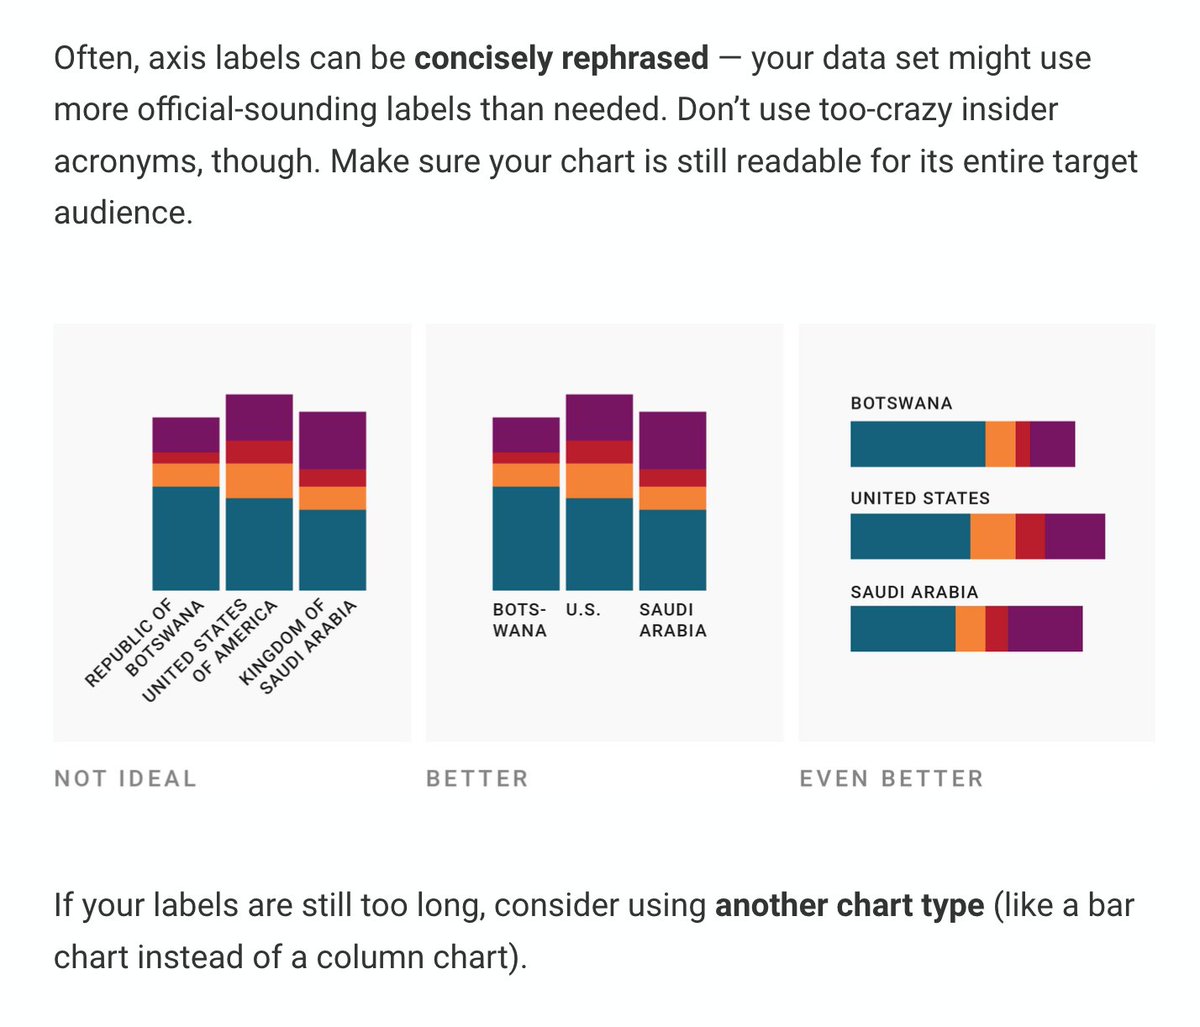 Text might be the most neglected part of #dataviz. We talk a lot about how the right chart type and colors can improve visualizations – but not enough about how to use words well. So I wrote about that in my latest article: blog.datawrapper.de/text-in-data-v…